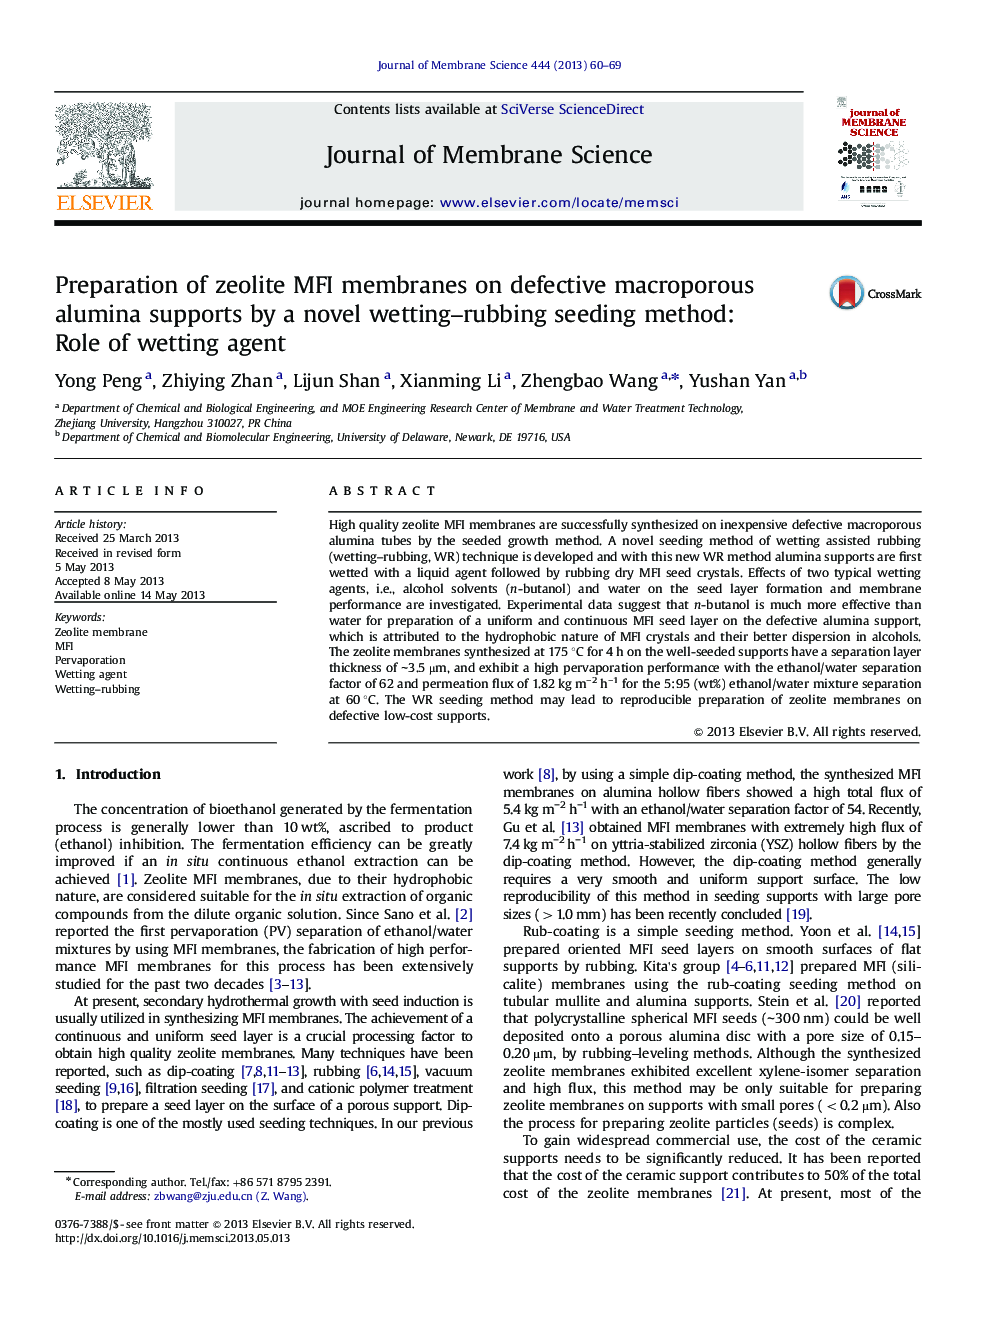 Preparation of zeolite MFI membranes on defective macroporous alumina supports by a novel wetting-rubbing seeding method: Role of wetting agent